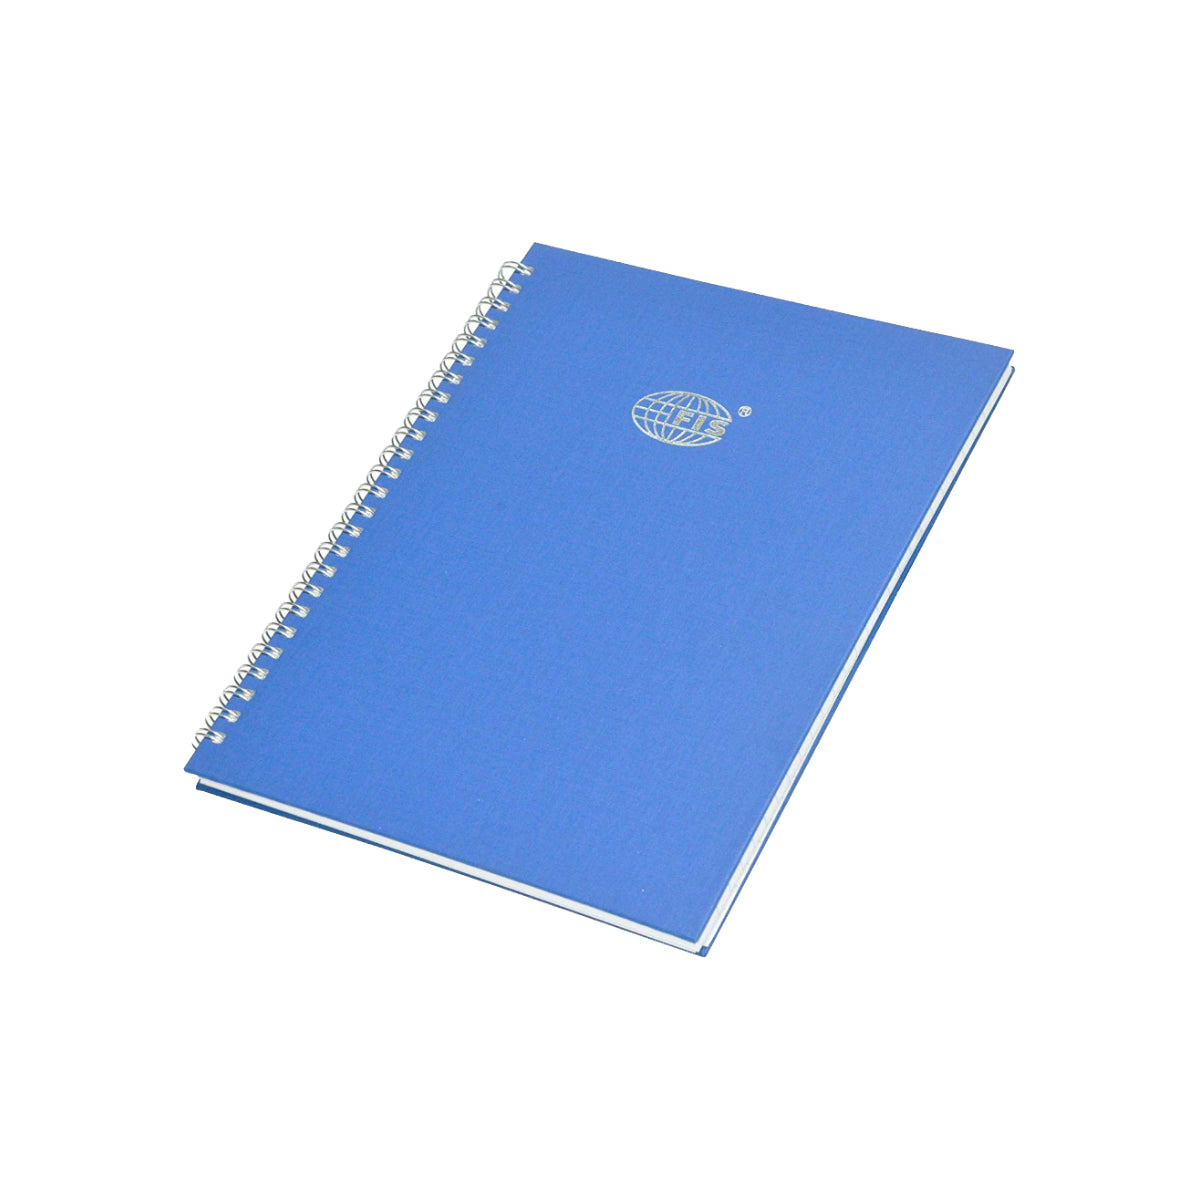 FIS Ruled Manuscript/Register Book with side spiral binding,10x8 inches, 2QR - 96 sheets, Blue